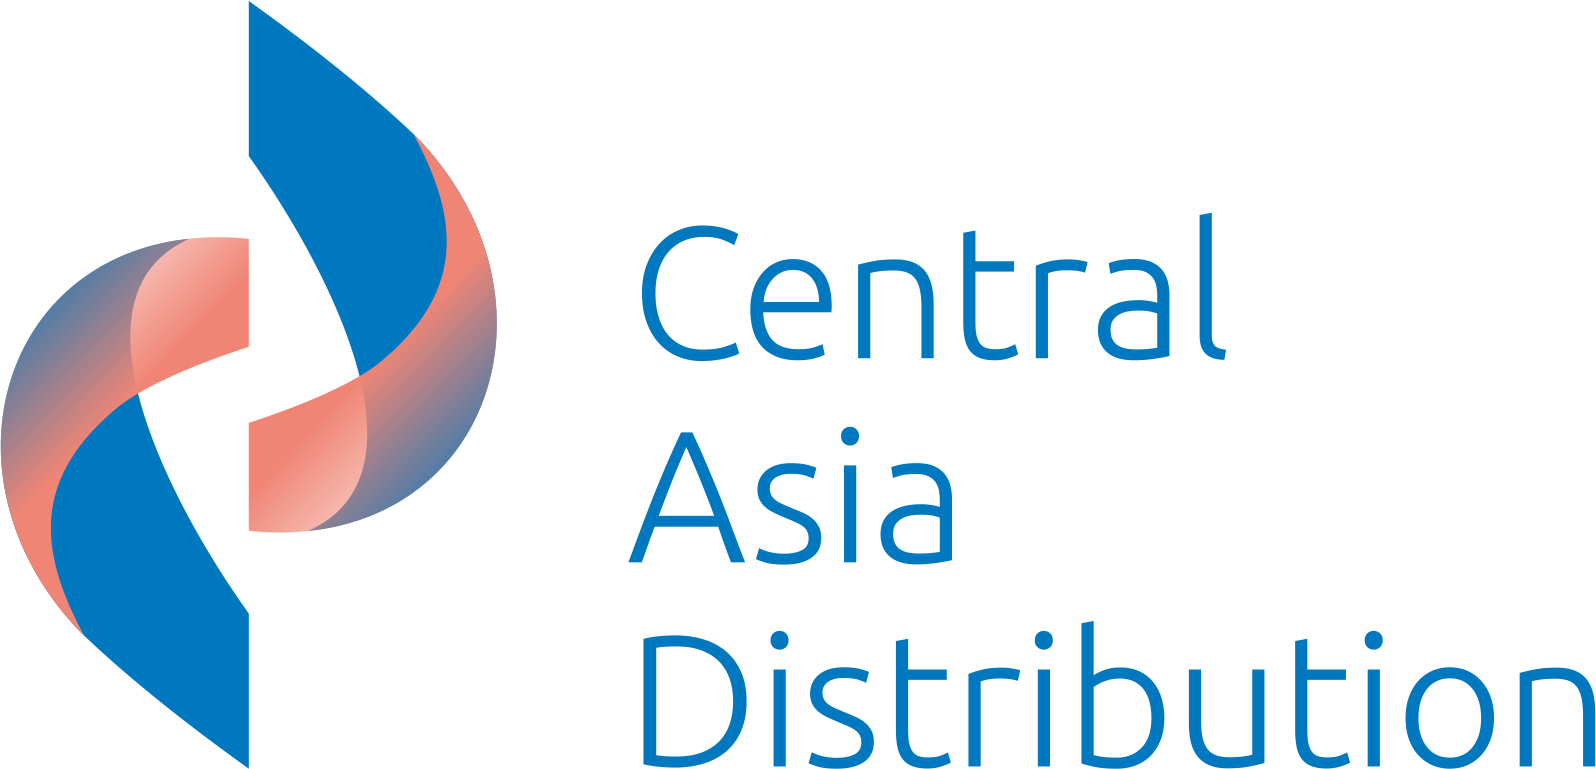 Central Asia Distribution